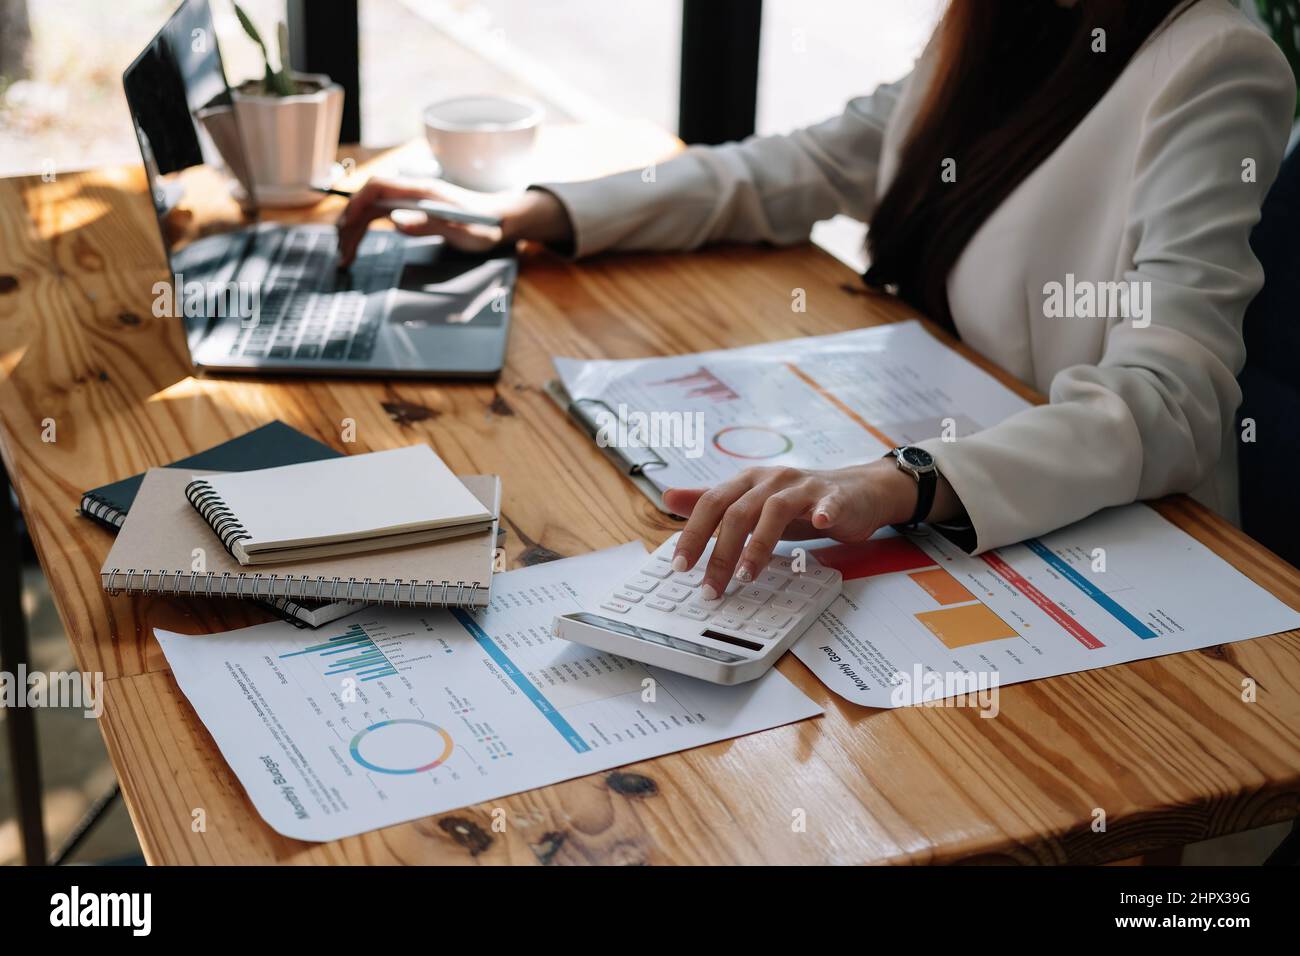 Businesswoman accountant or financial expert analyze business report graph and finance chart at corporate office. Concept of finance economy, banking Stock Photo